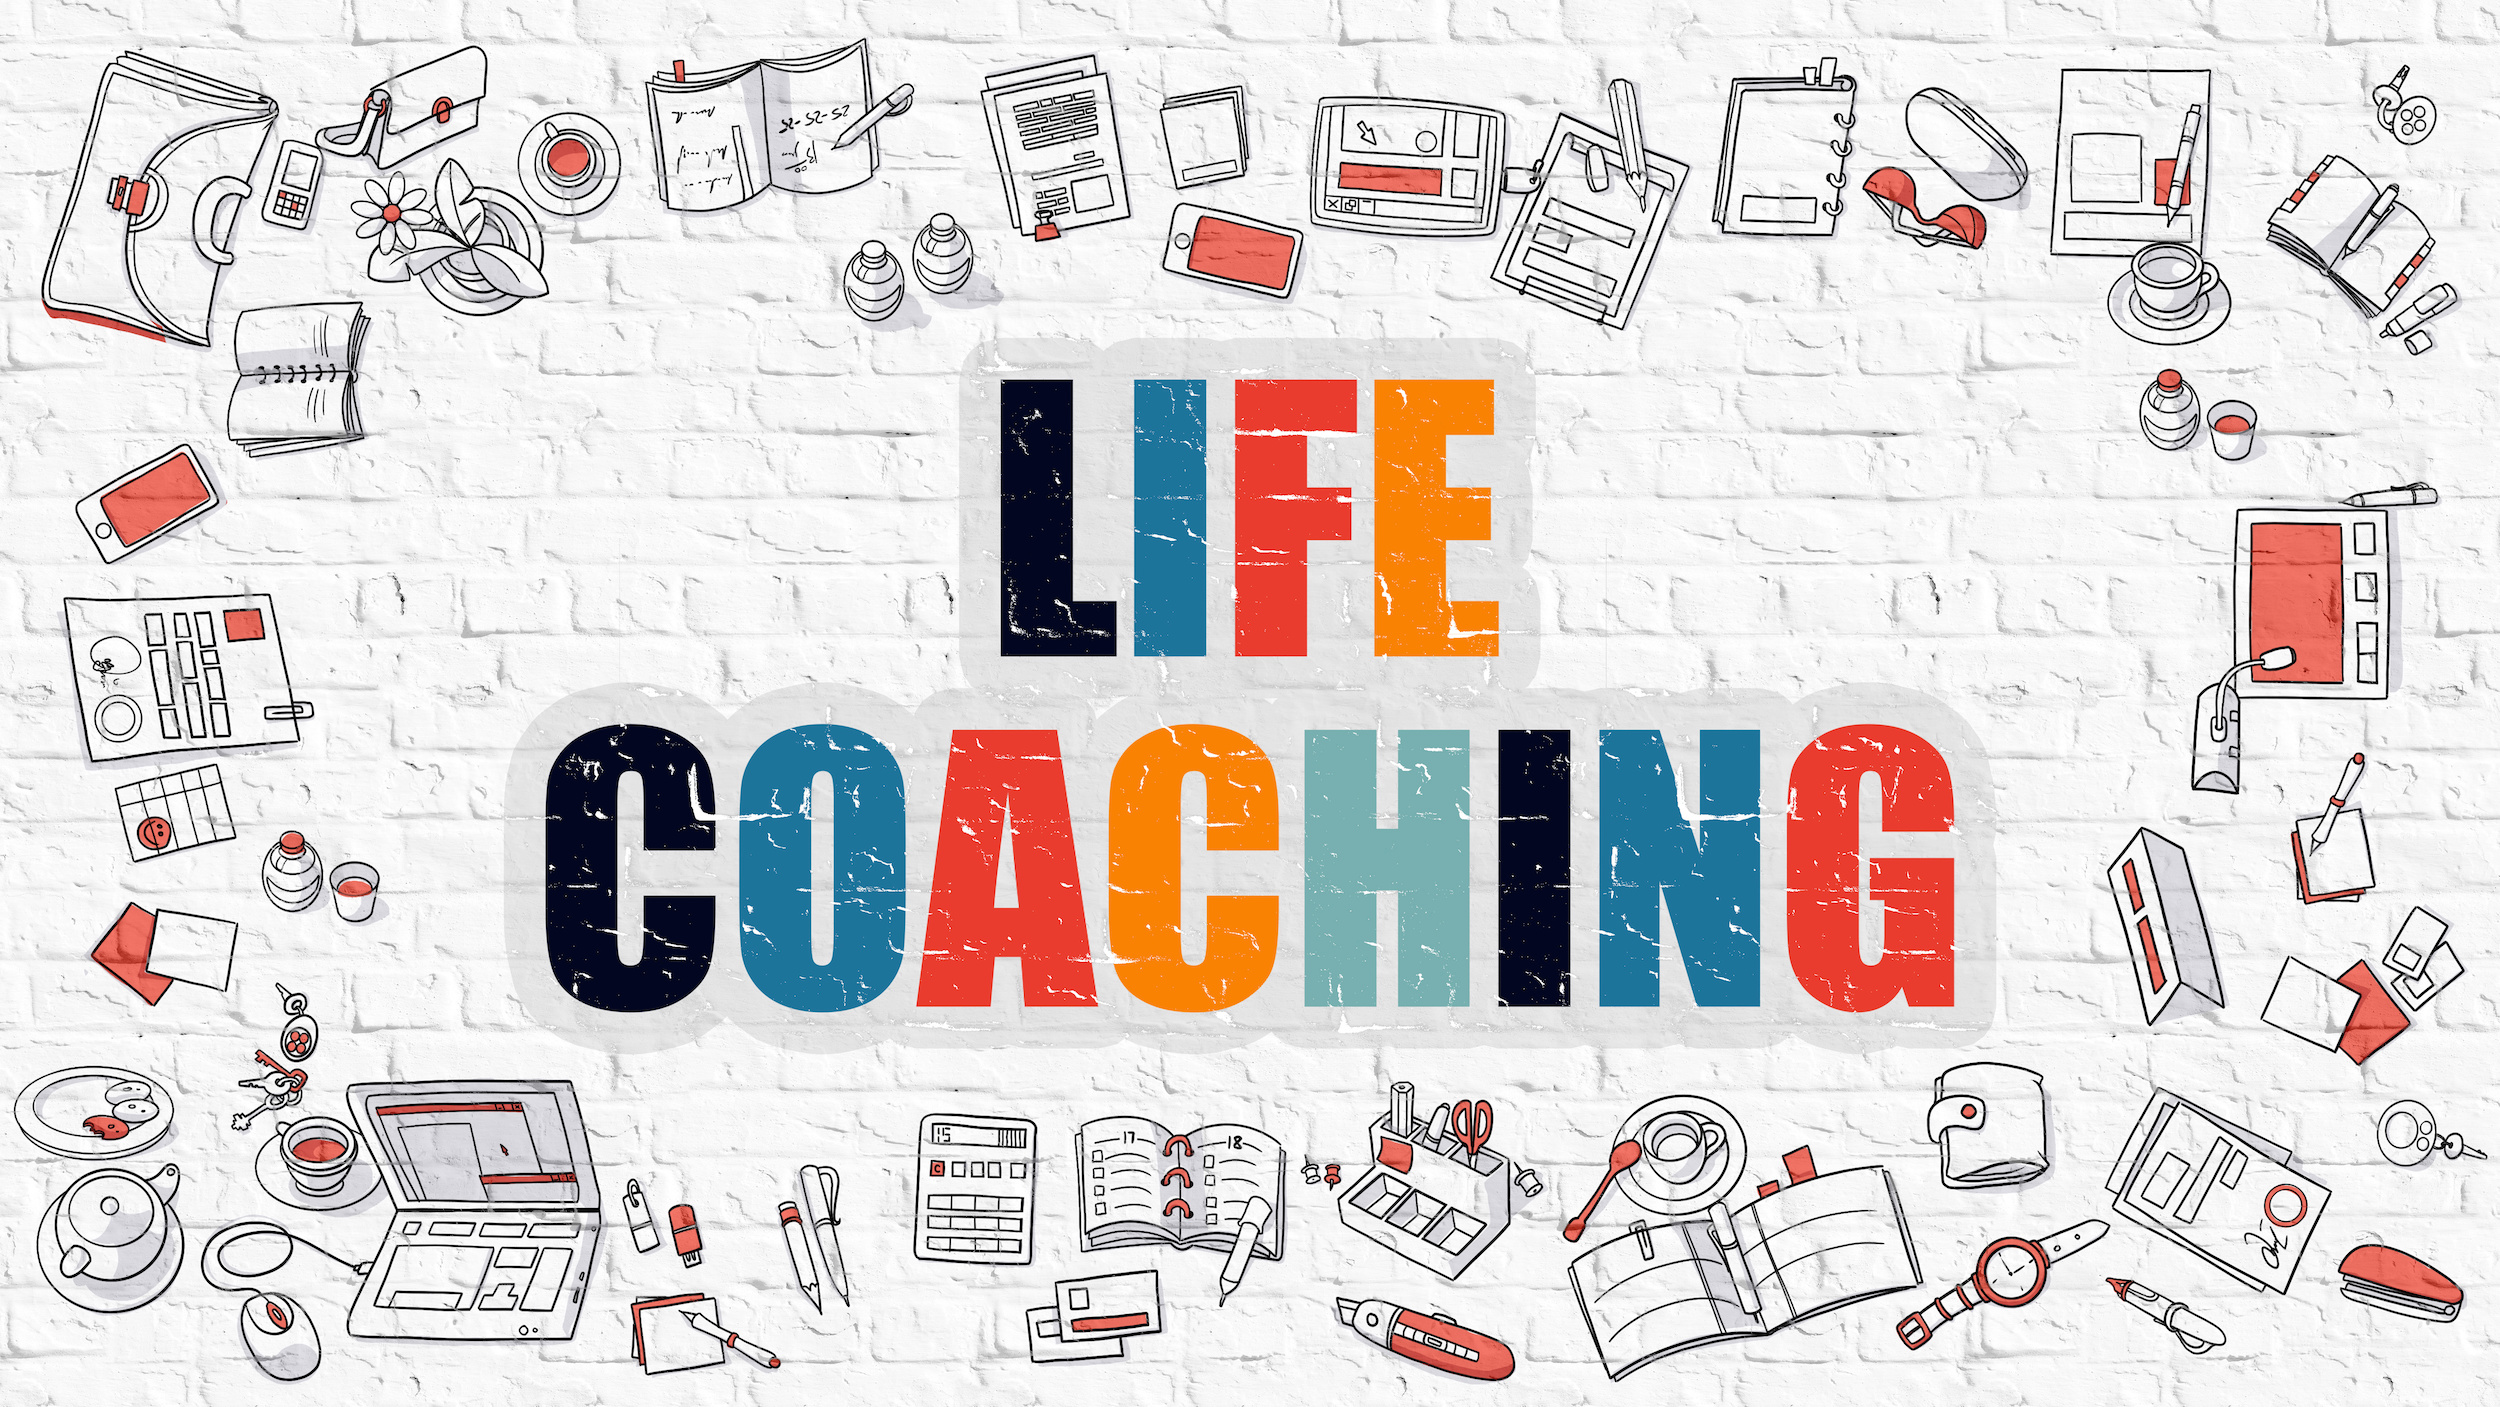 Life Coaching - Multicolor Concept with Doodle Icons Around on White Brick Wall Background. Modern Illustration with Elements of Doodle Design Style.